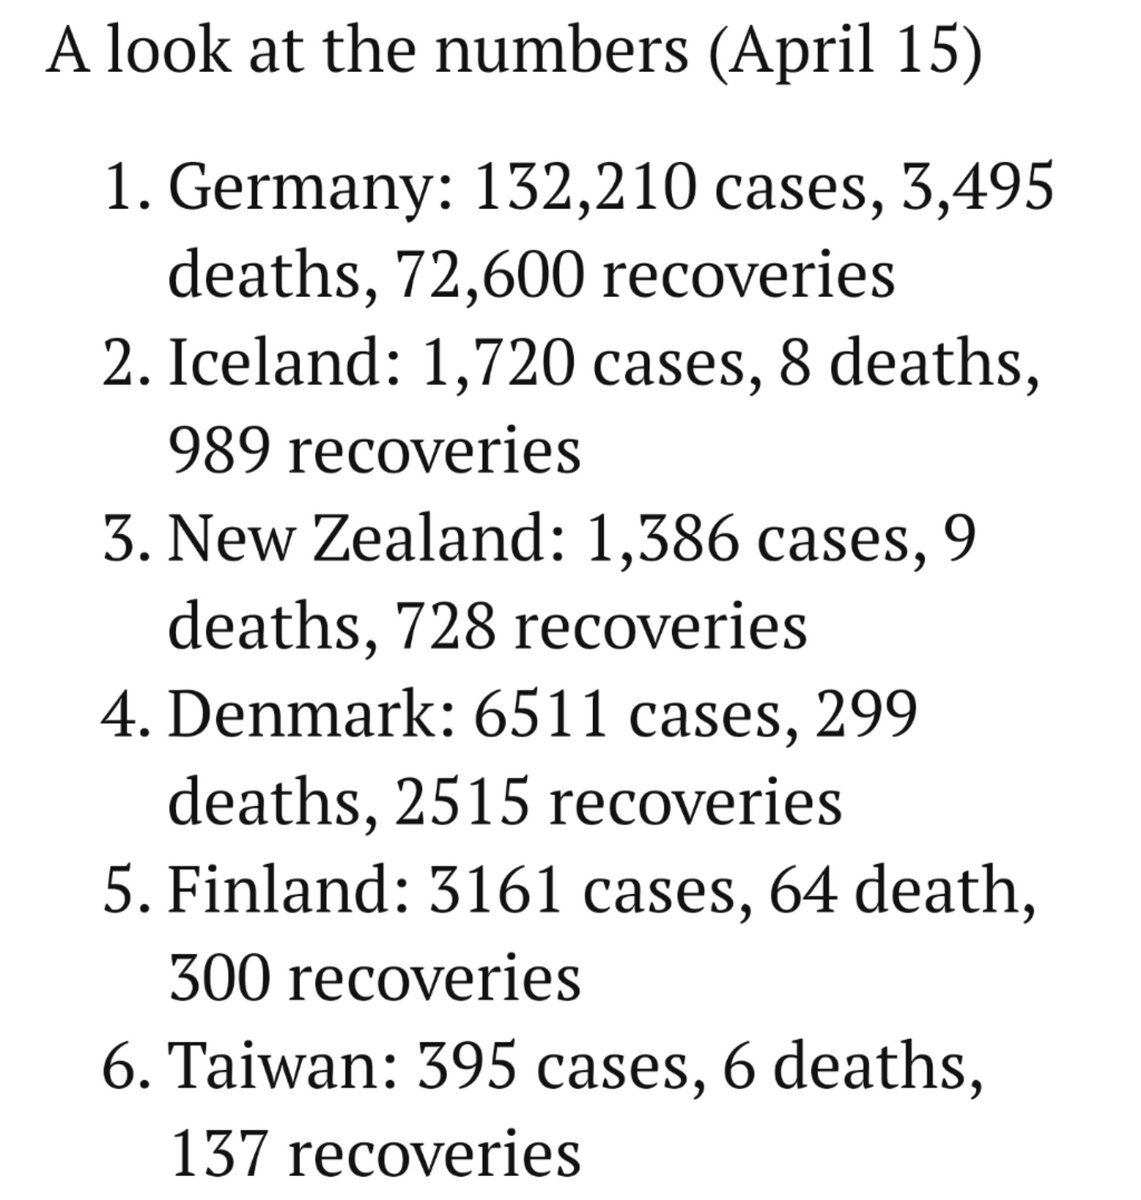 For reference, here are the numbers from the other countries on this list.